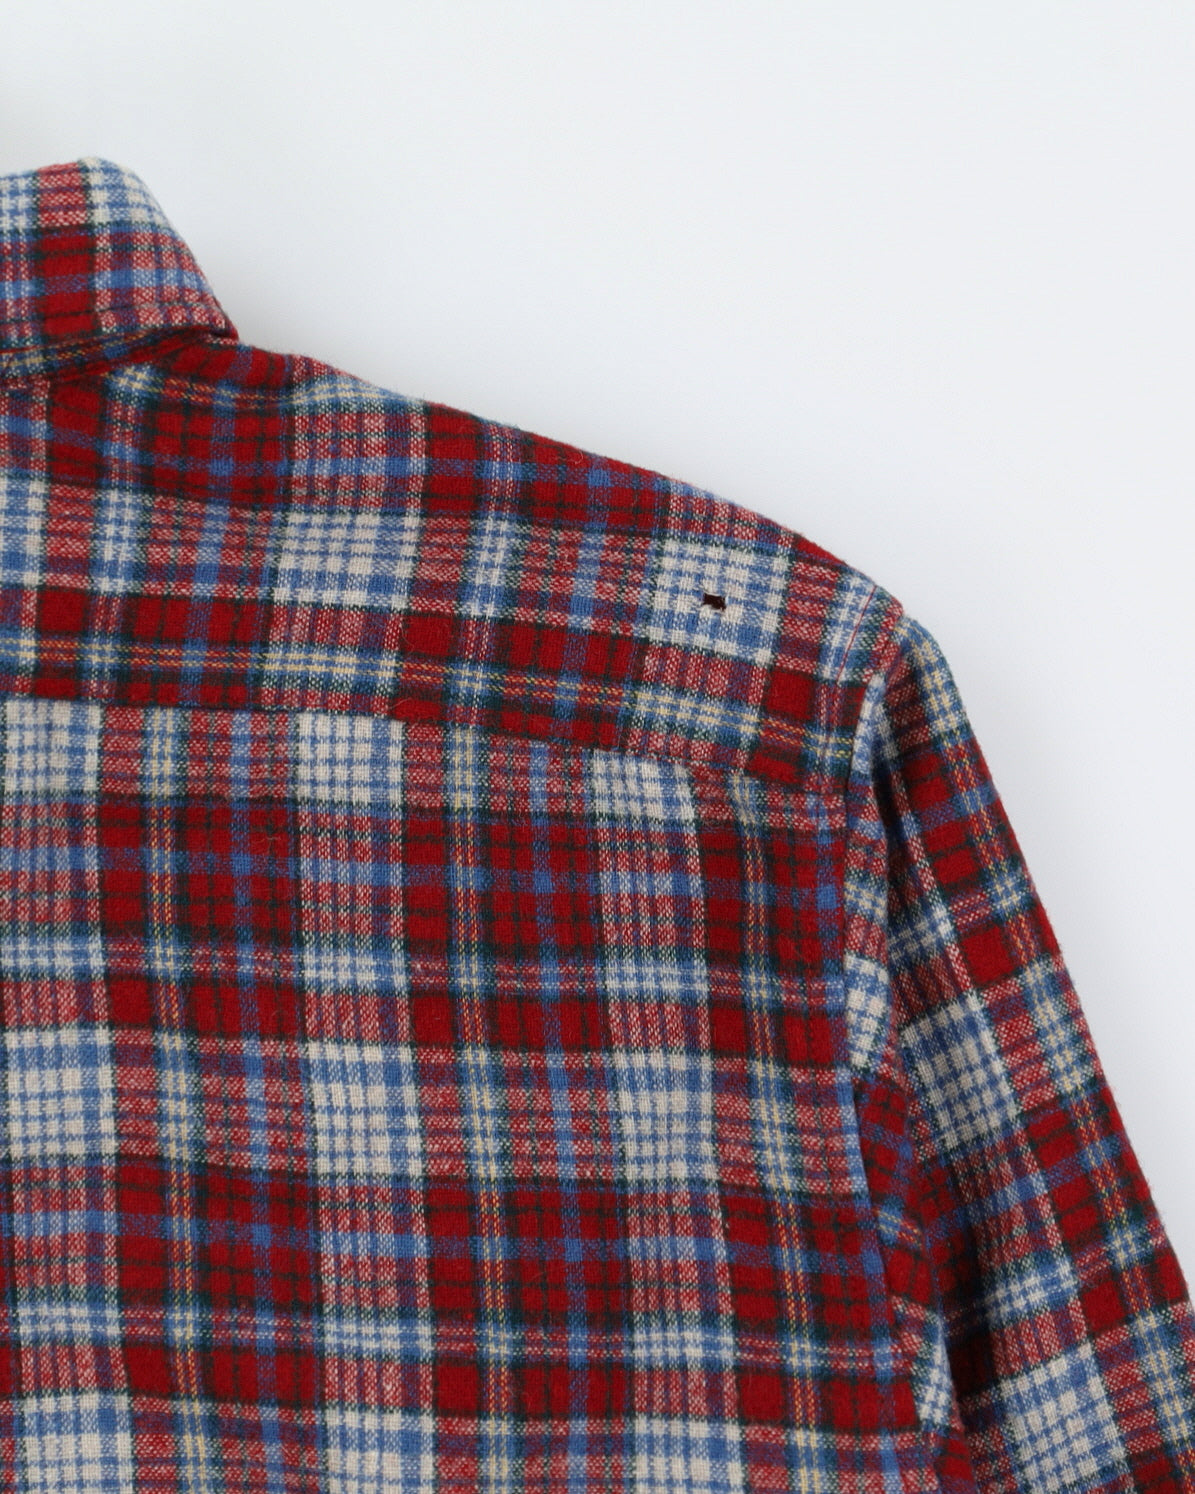 Vintage 80s Lobo By Pendleton Checked Flannel Shirt - L